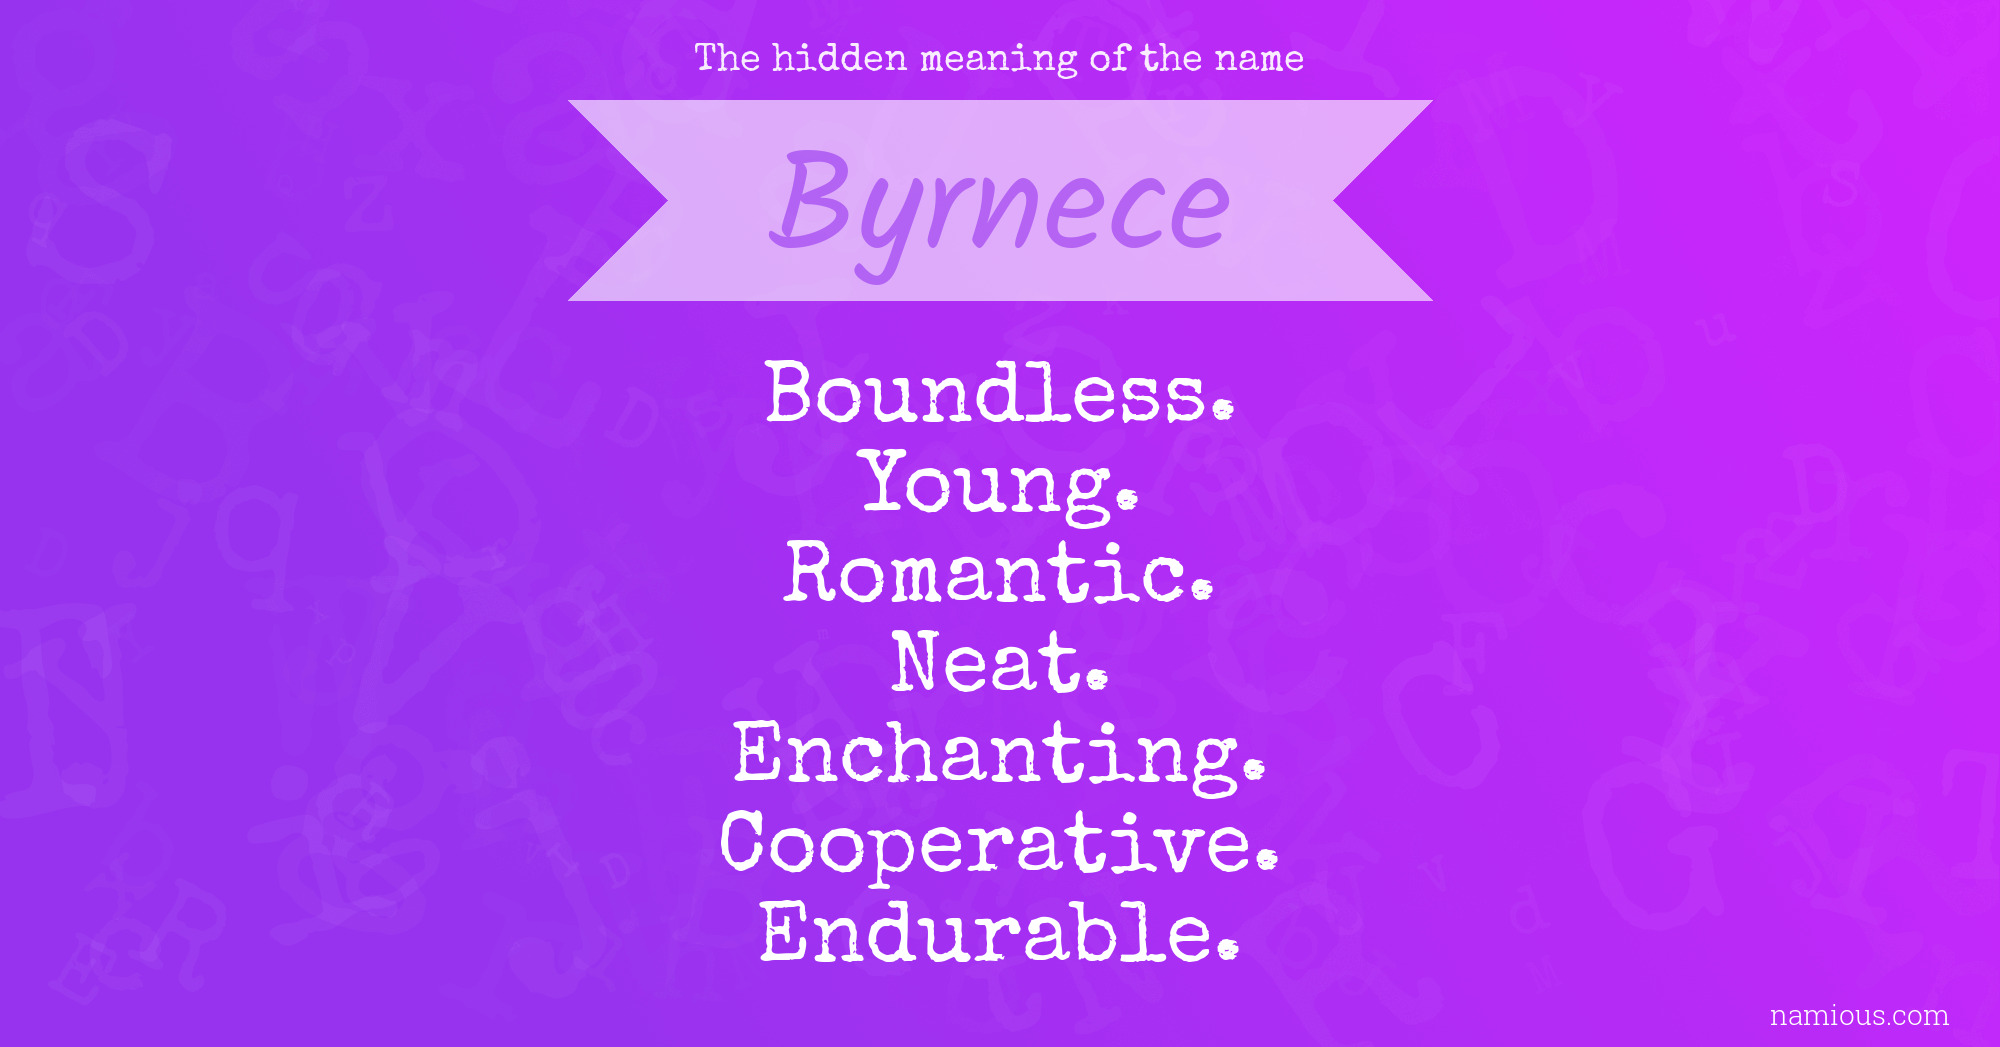 The hidden meaning of the name Byrnece